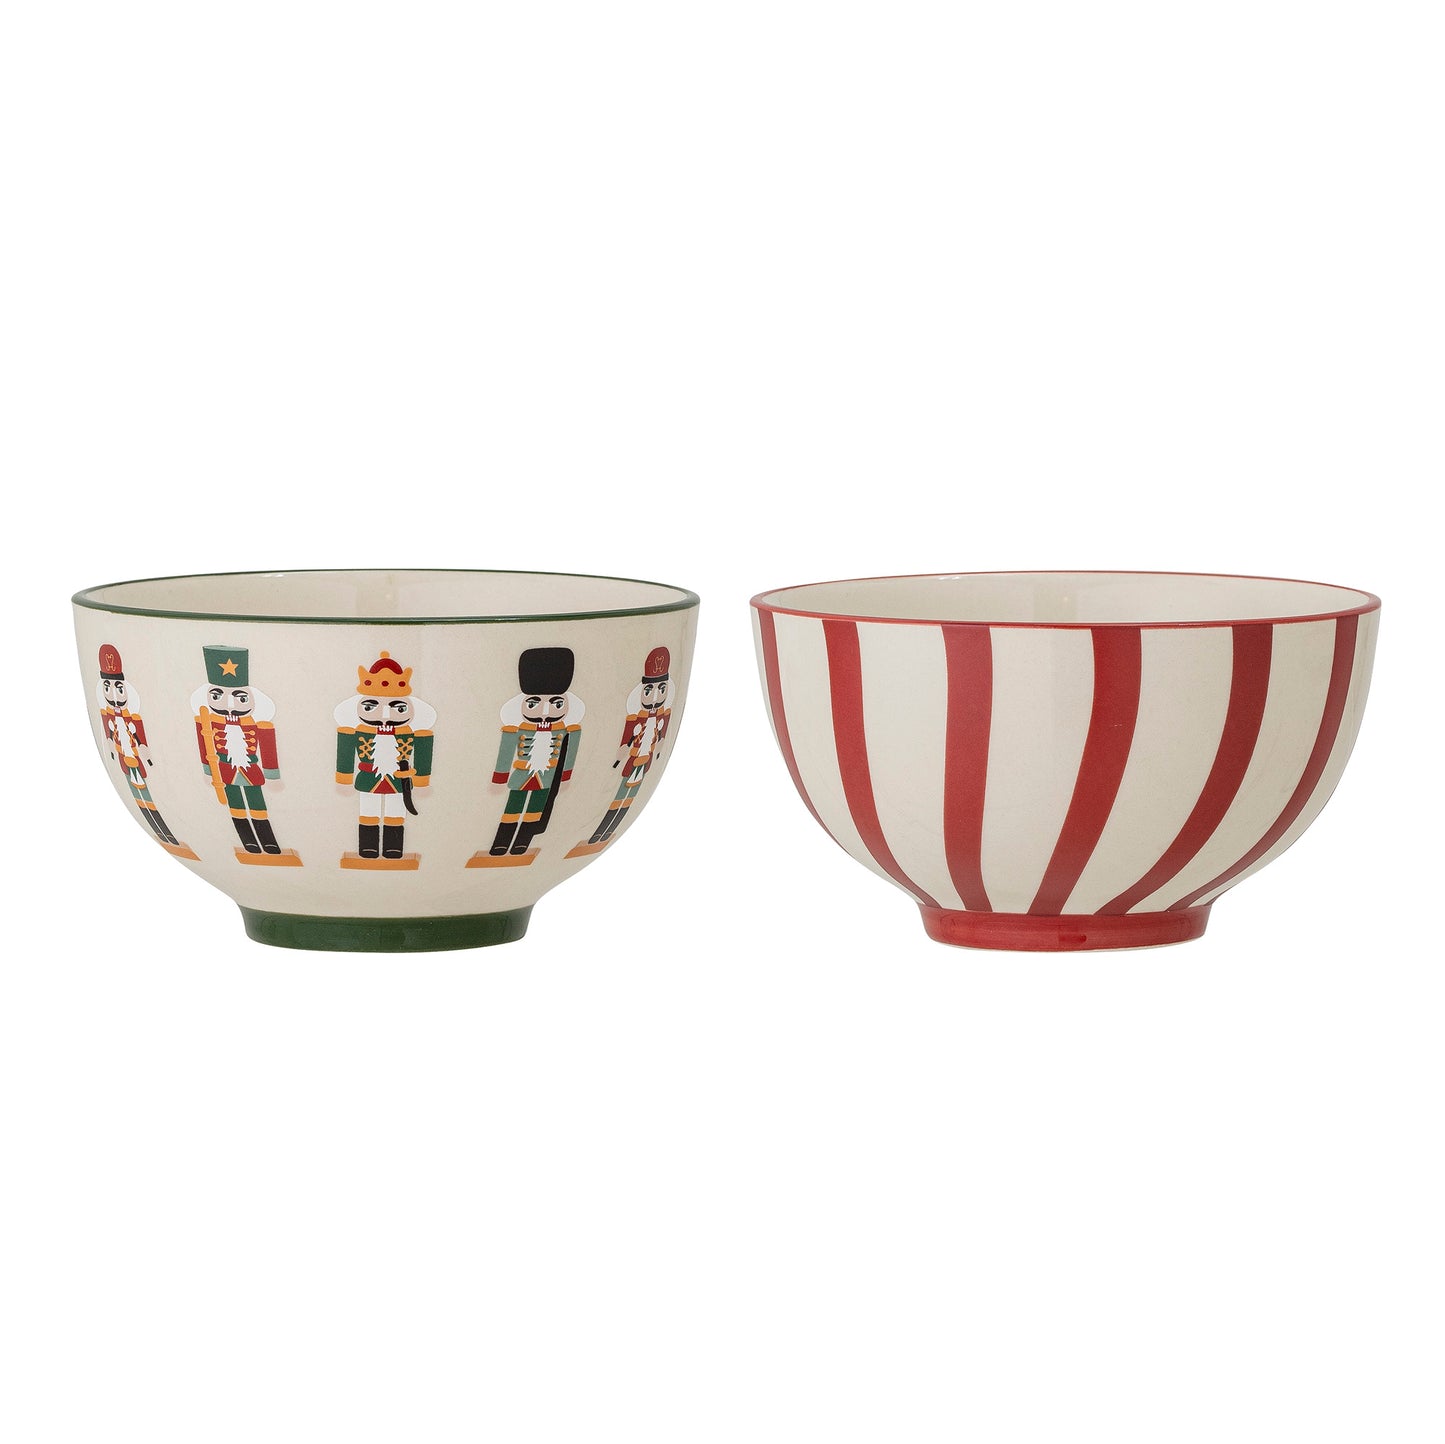 Jolly bowl, red, earthenware, set of 2